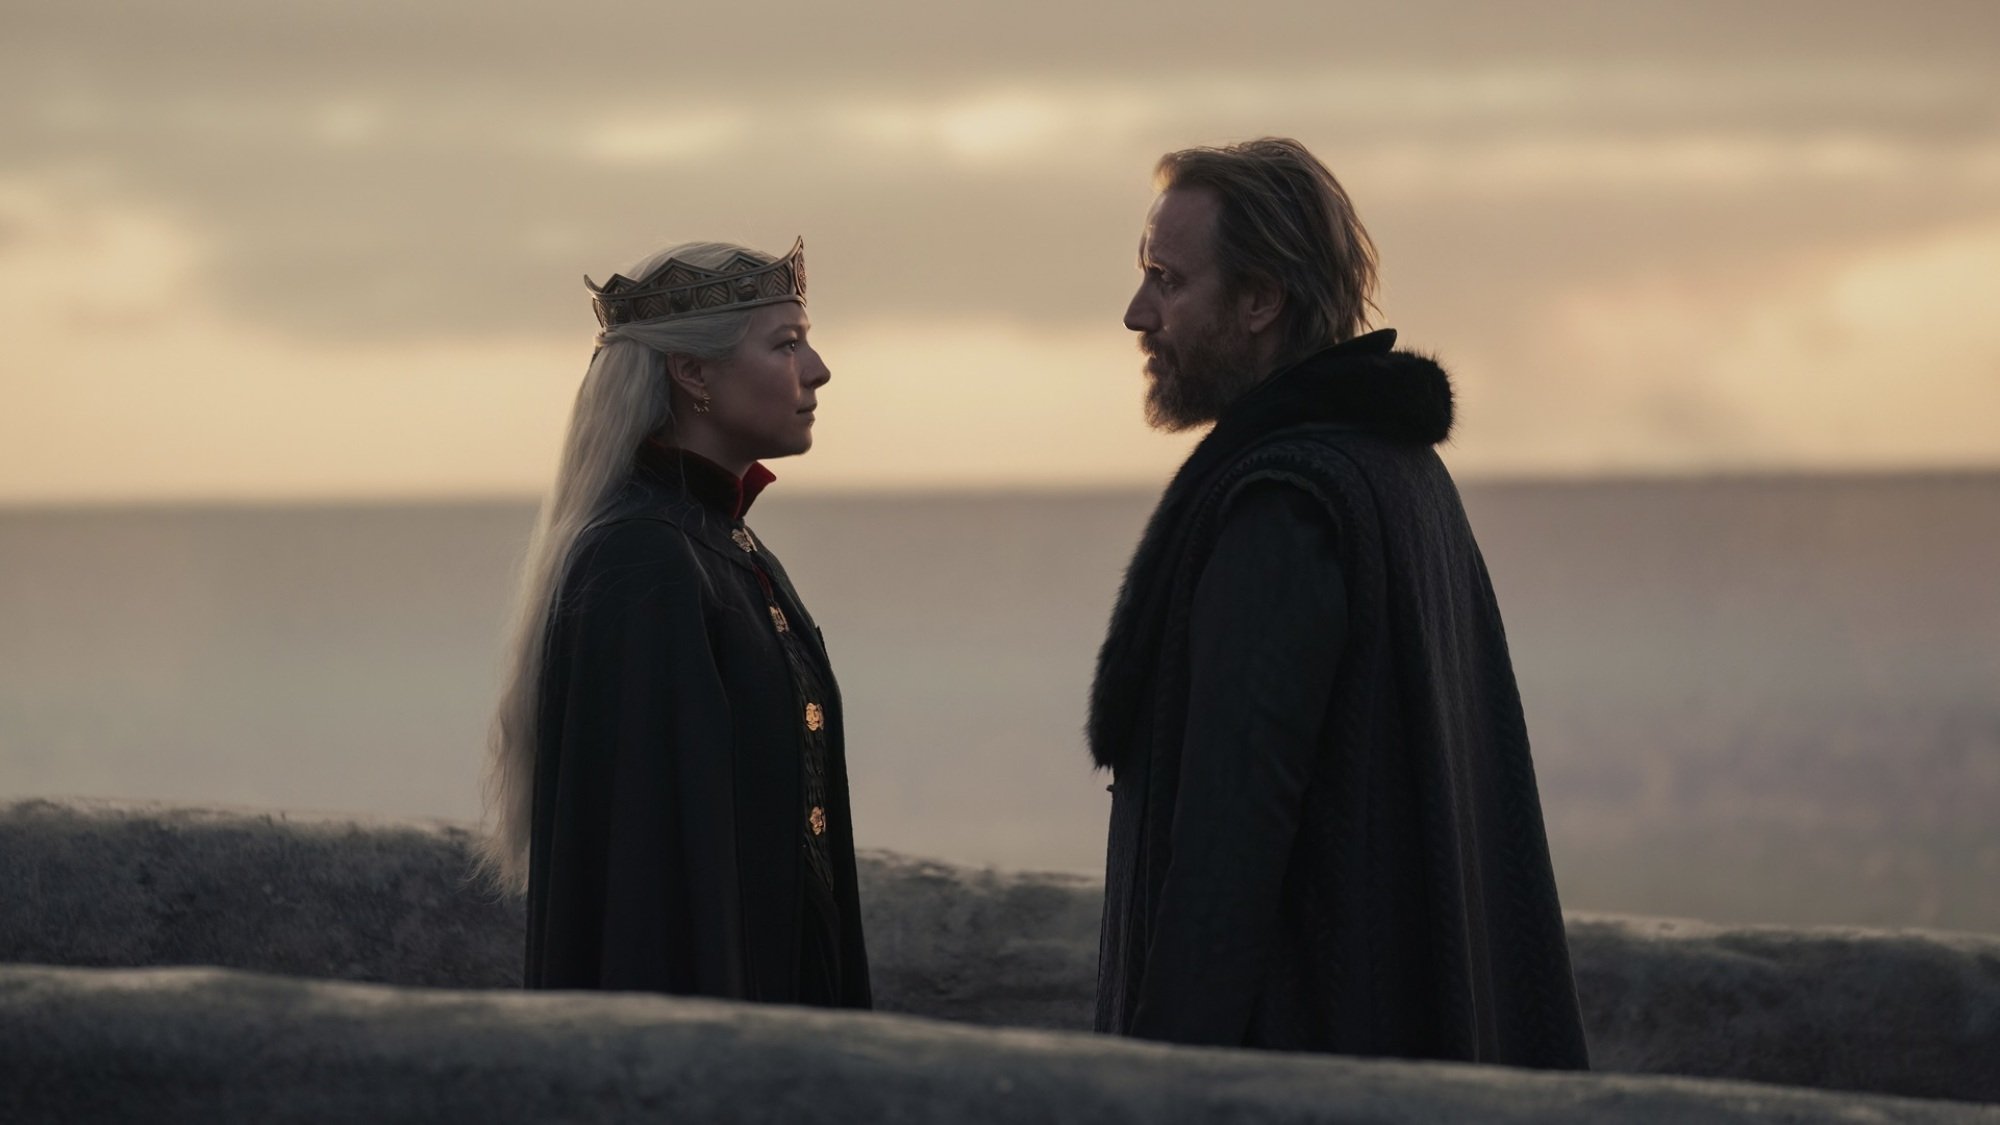 A woman with silver blonde hair in a crown and black cloak and a man in a black fur cloak stand on a stone path overlooking the ocean.